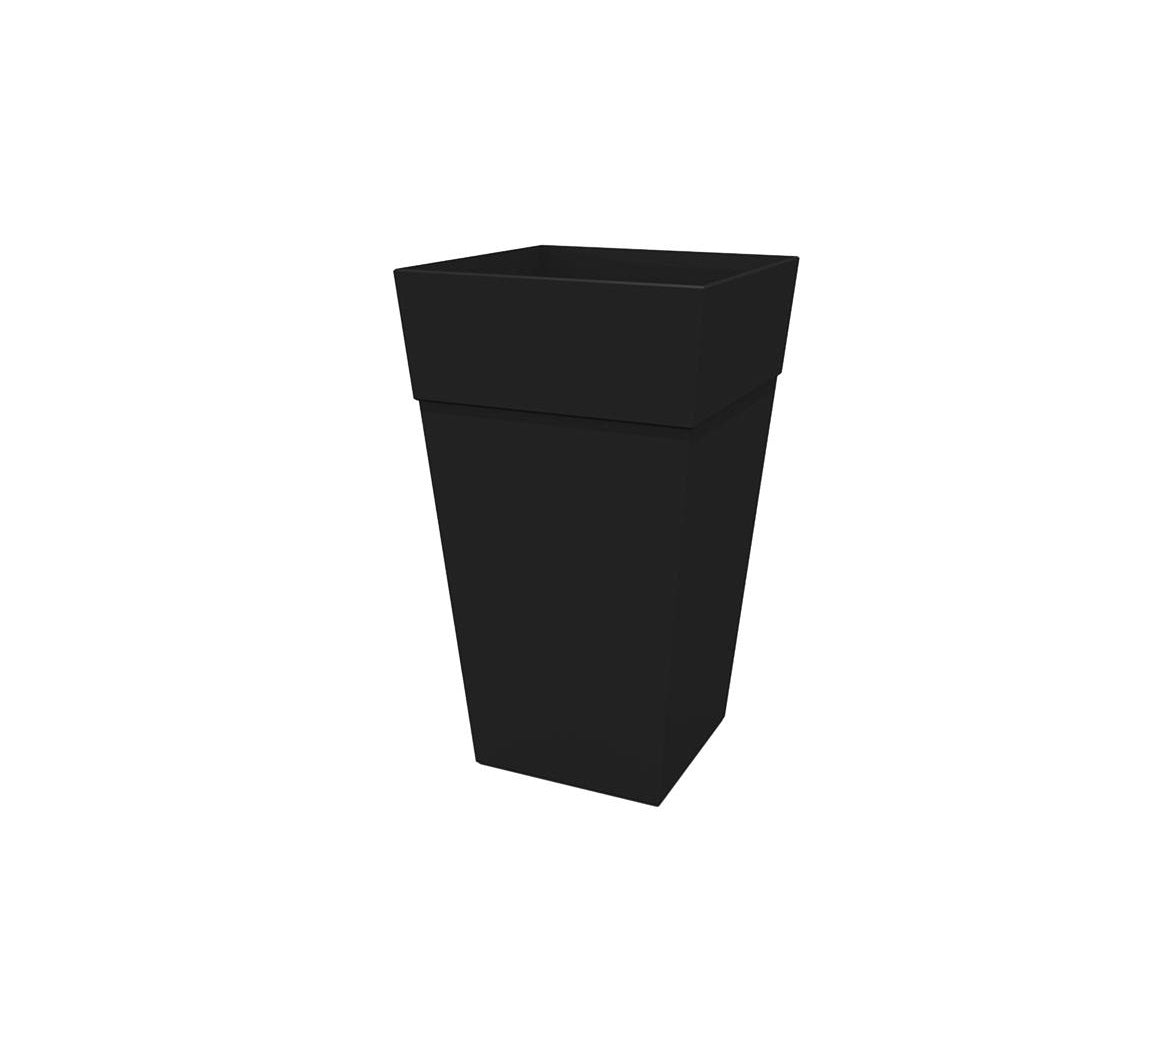 Bloem FPS2500 Finley Tall Tapered Planter, Black, 25 inches